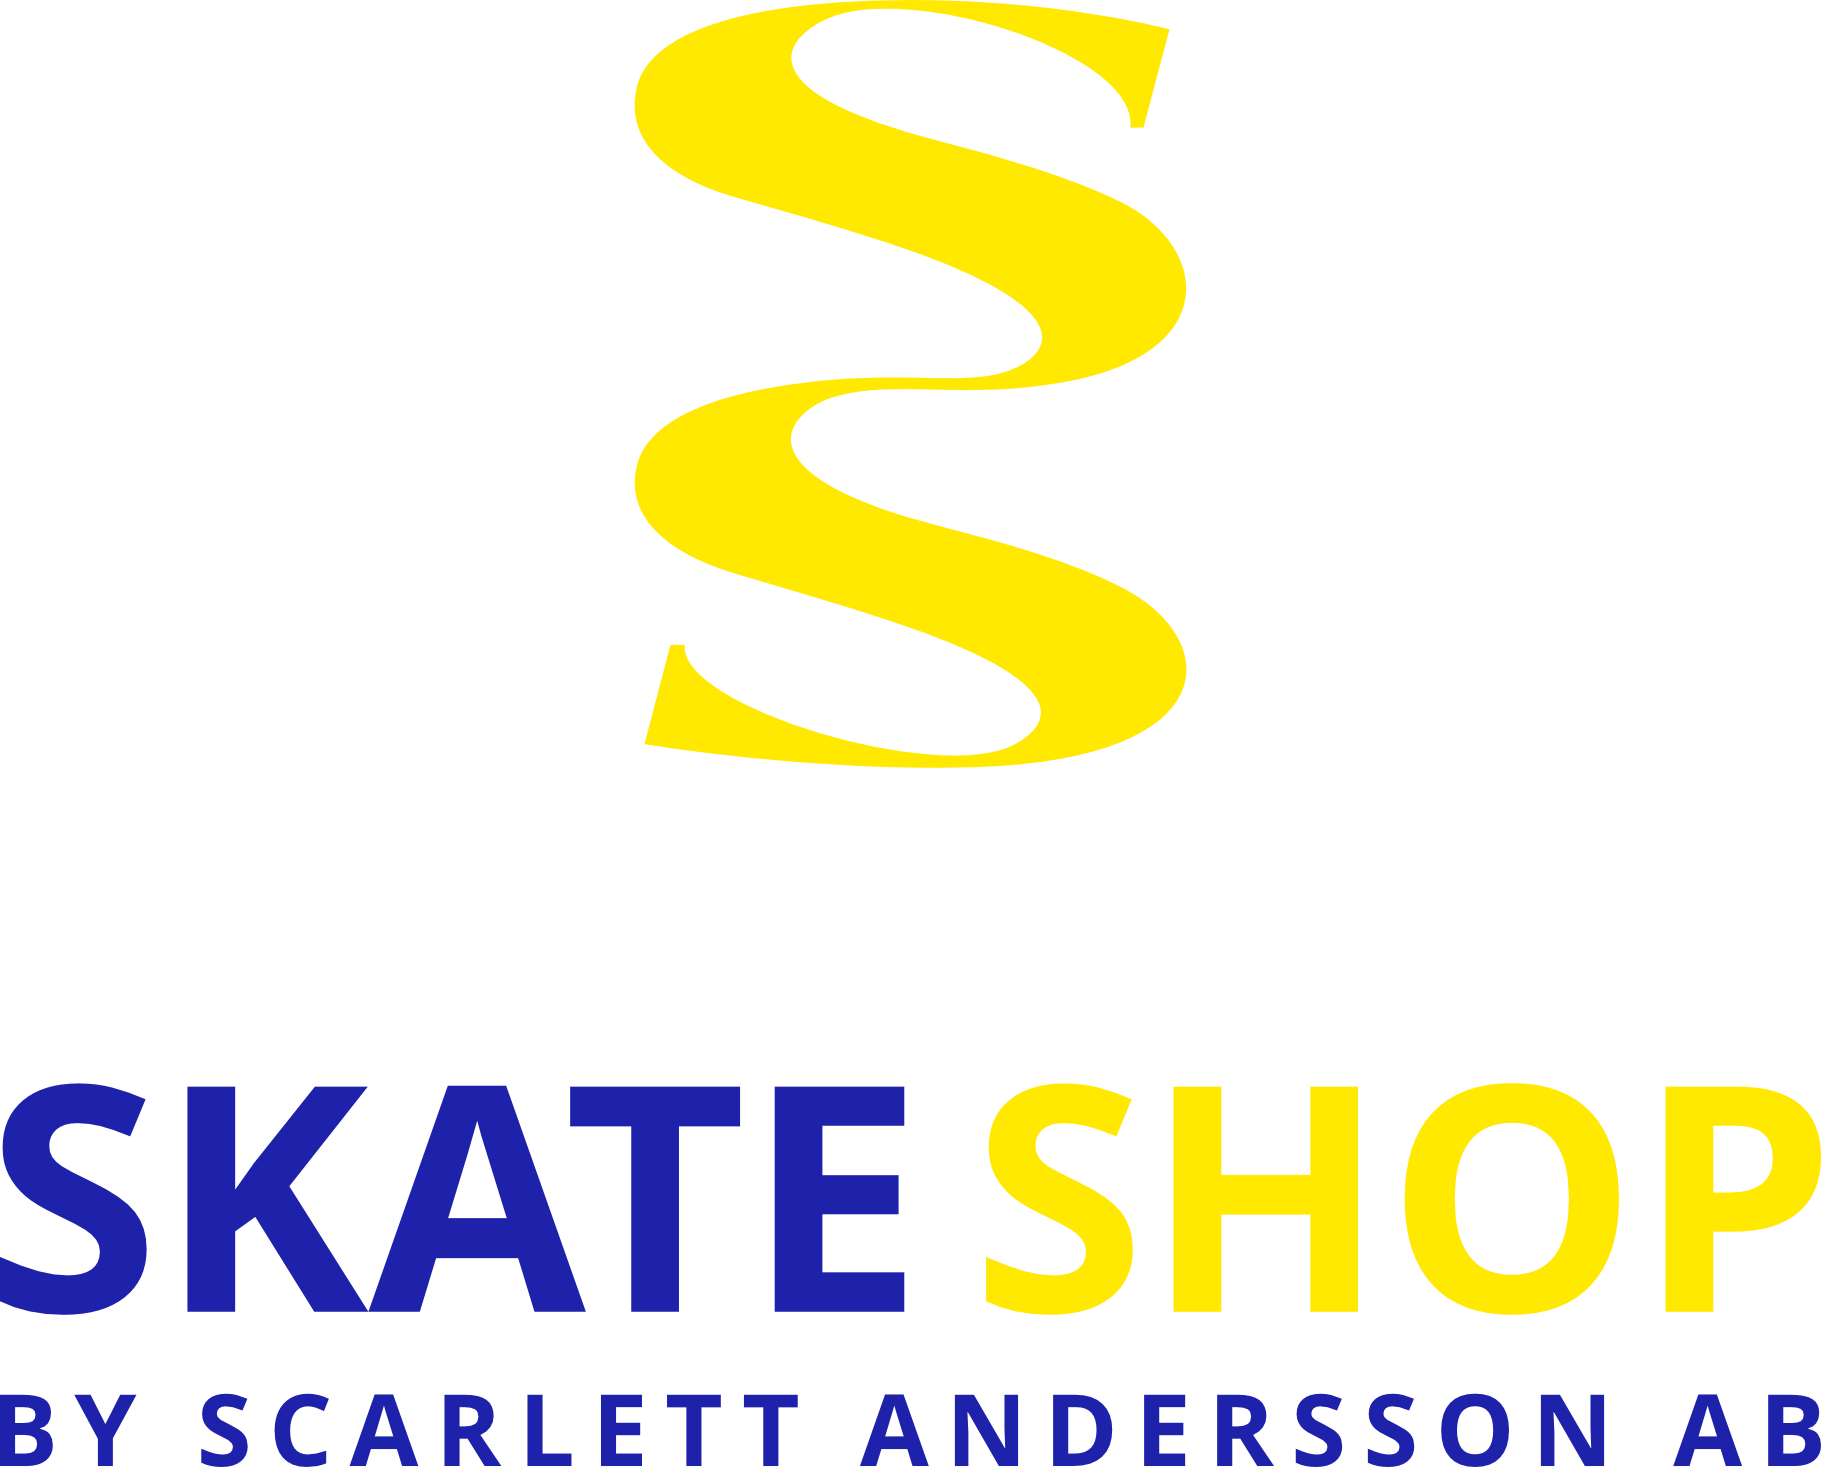 SS Skate Shop by Scarlett Andersson AB